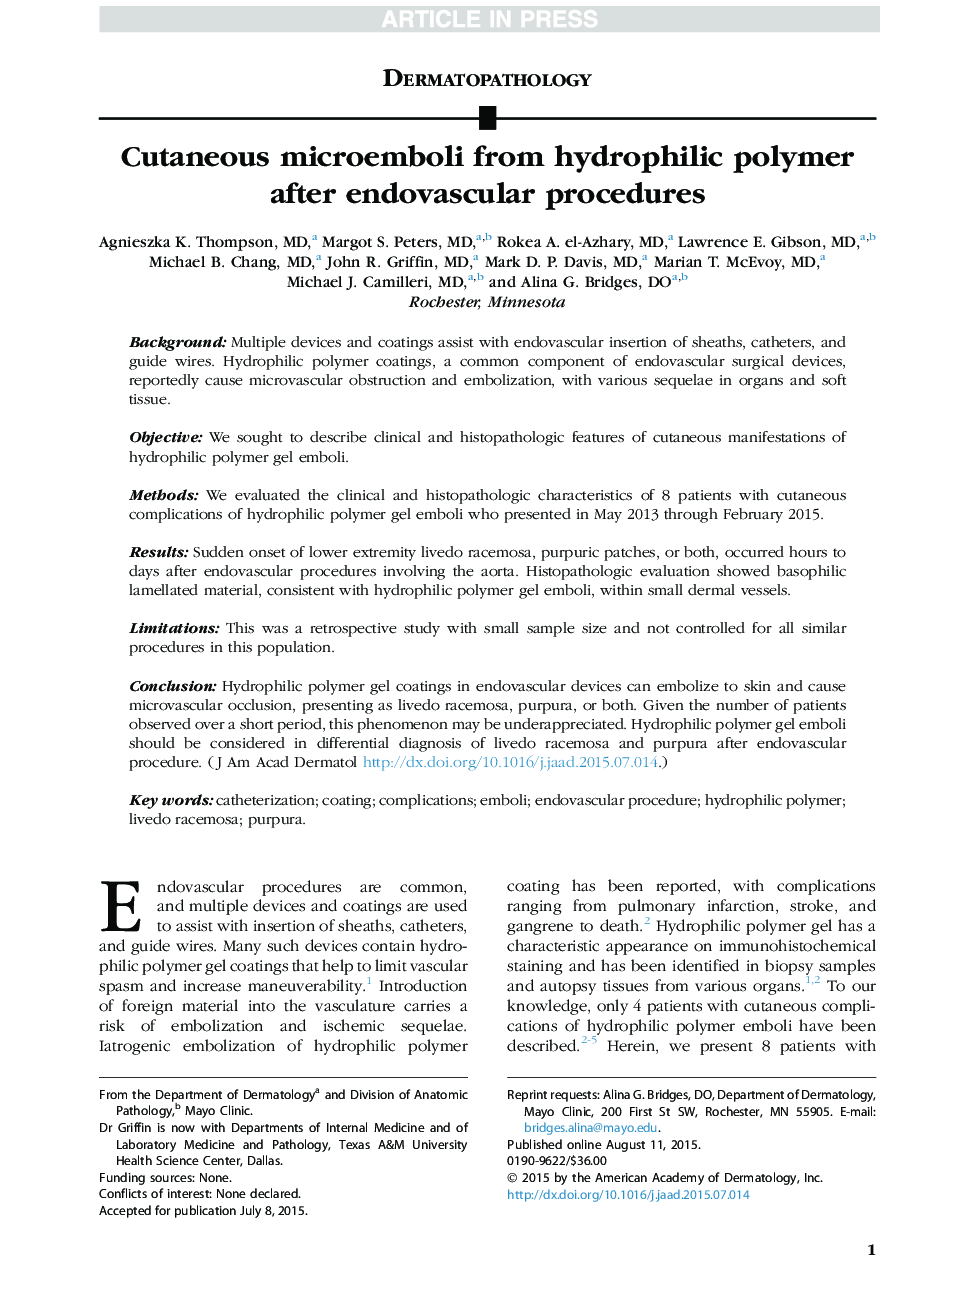 Cutaneous microemboli from hydrophilic polymer after endovascular procedures